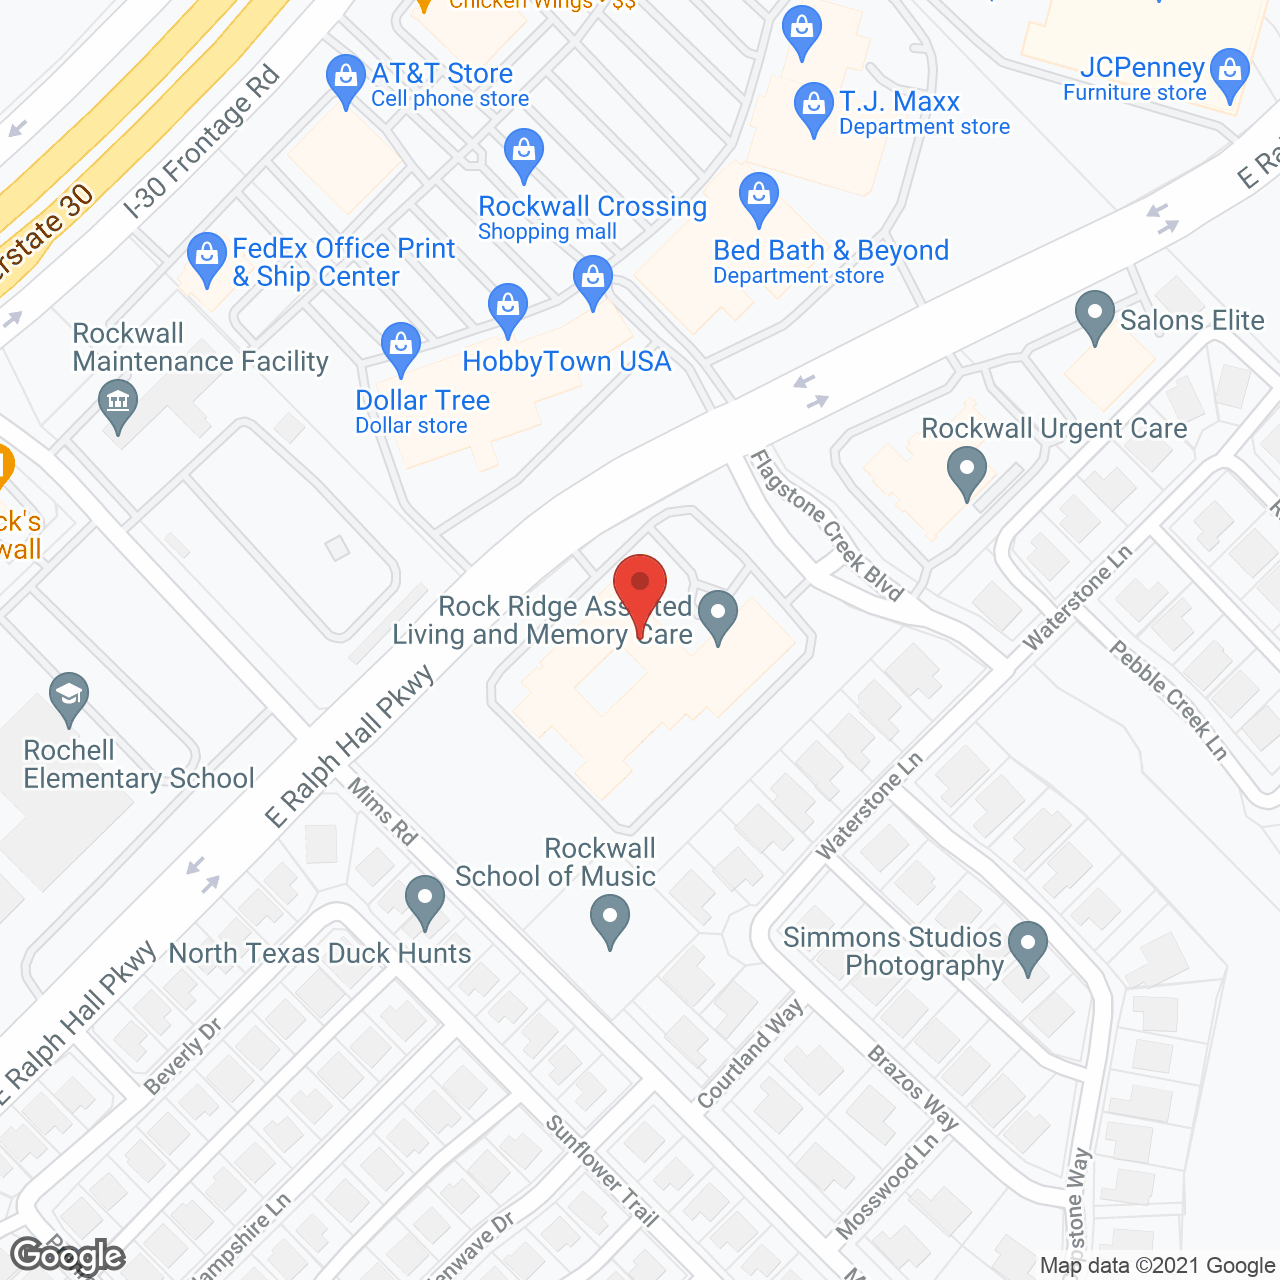 Rock Ridge Assisted Living and Memory Care in google map